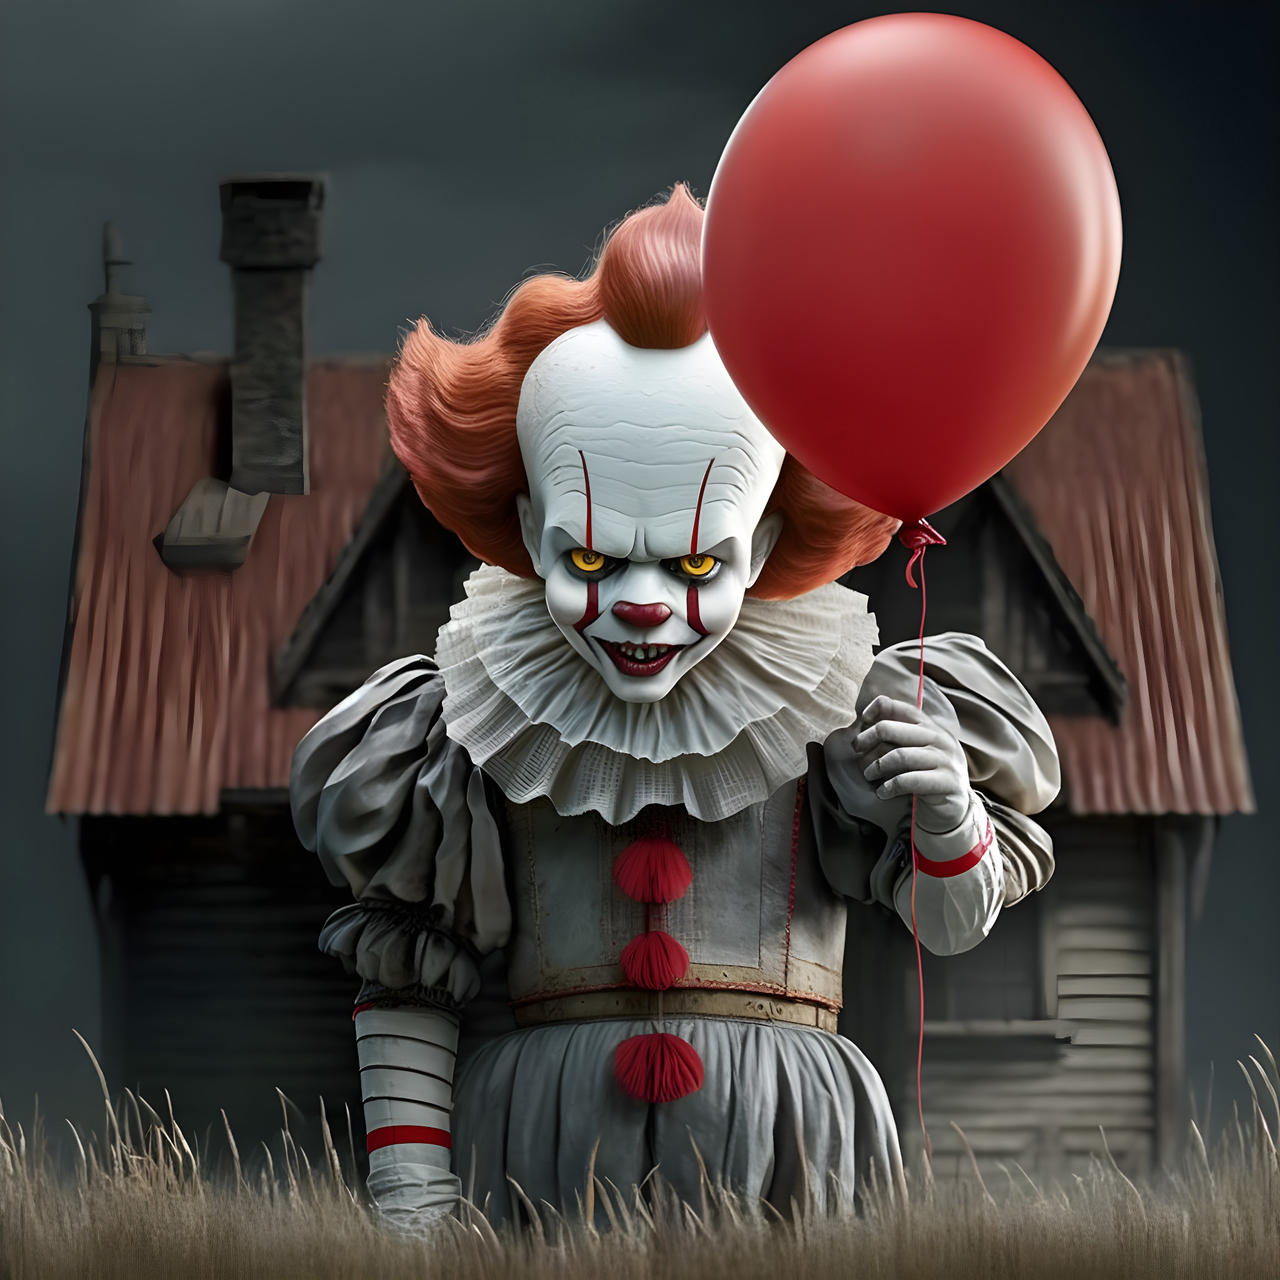 Pennywise by Hrod-ric on DeviantArt